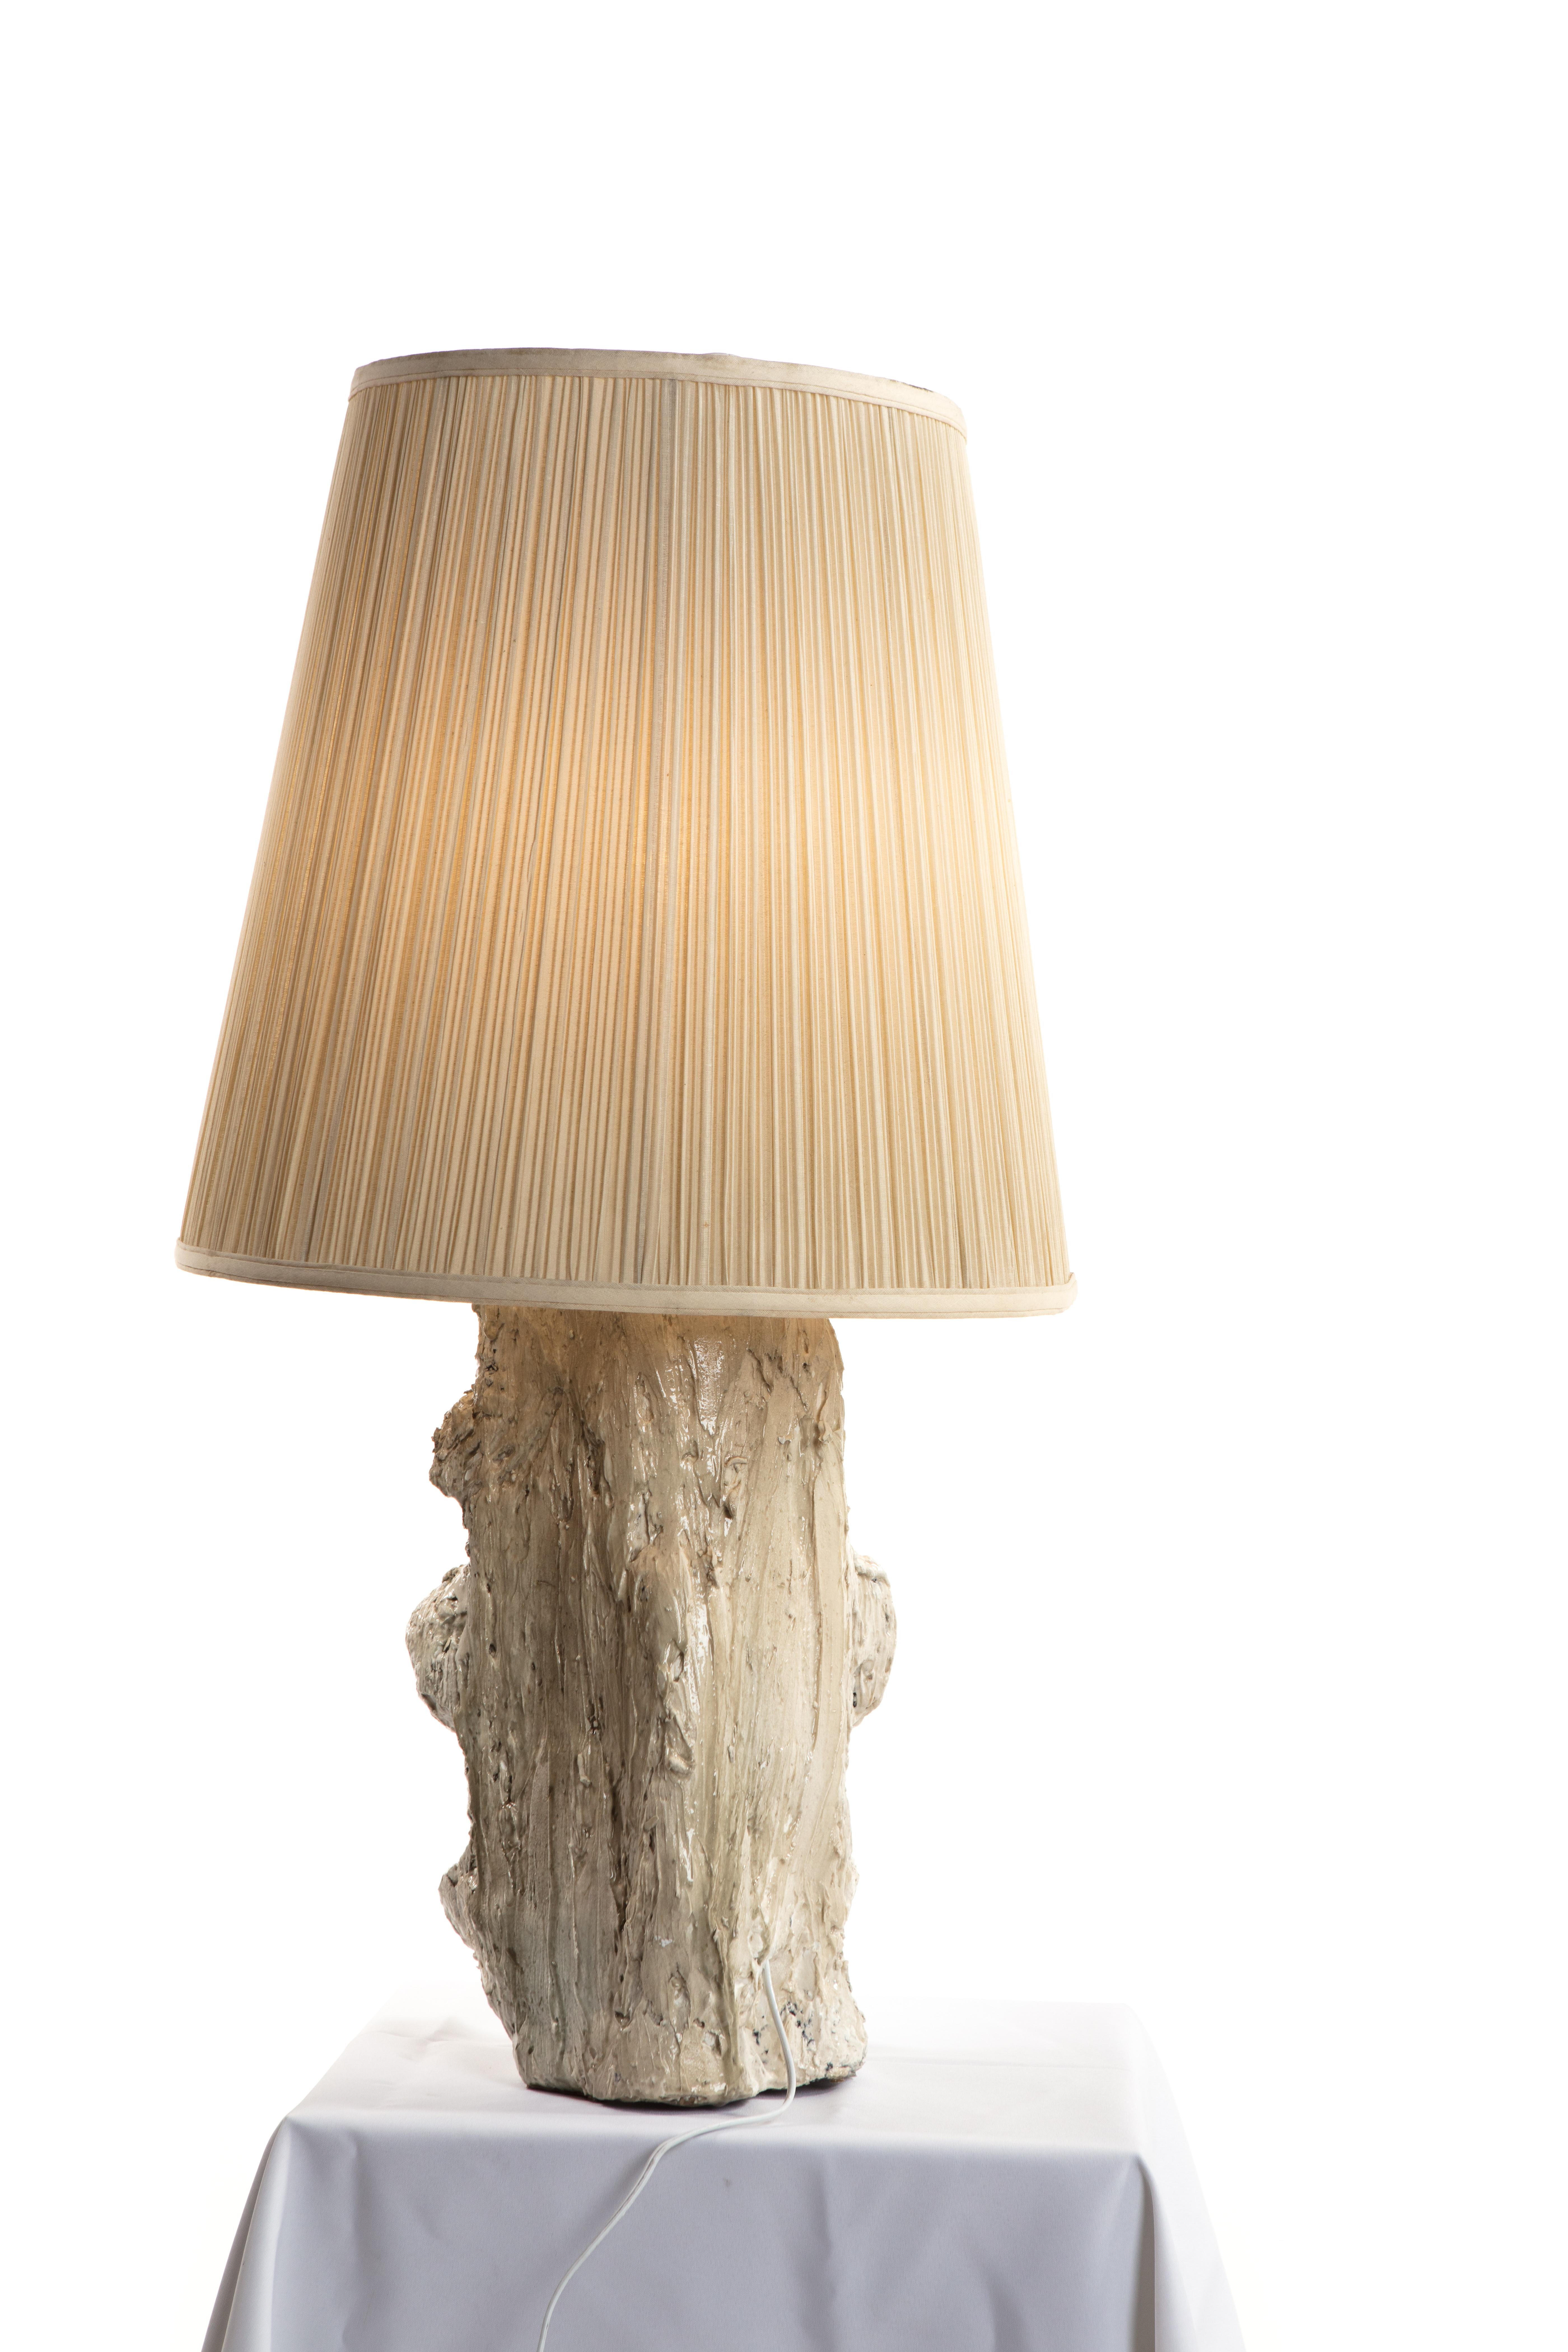 American White Sculptural Plaster Table Lamp, 21st Century by Mattia Biagi For Sale